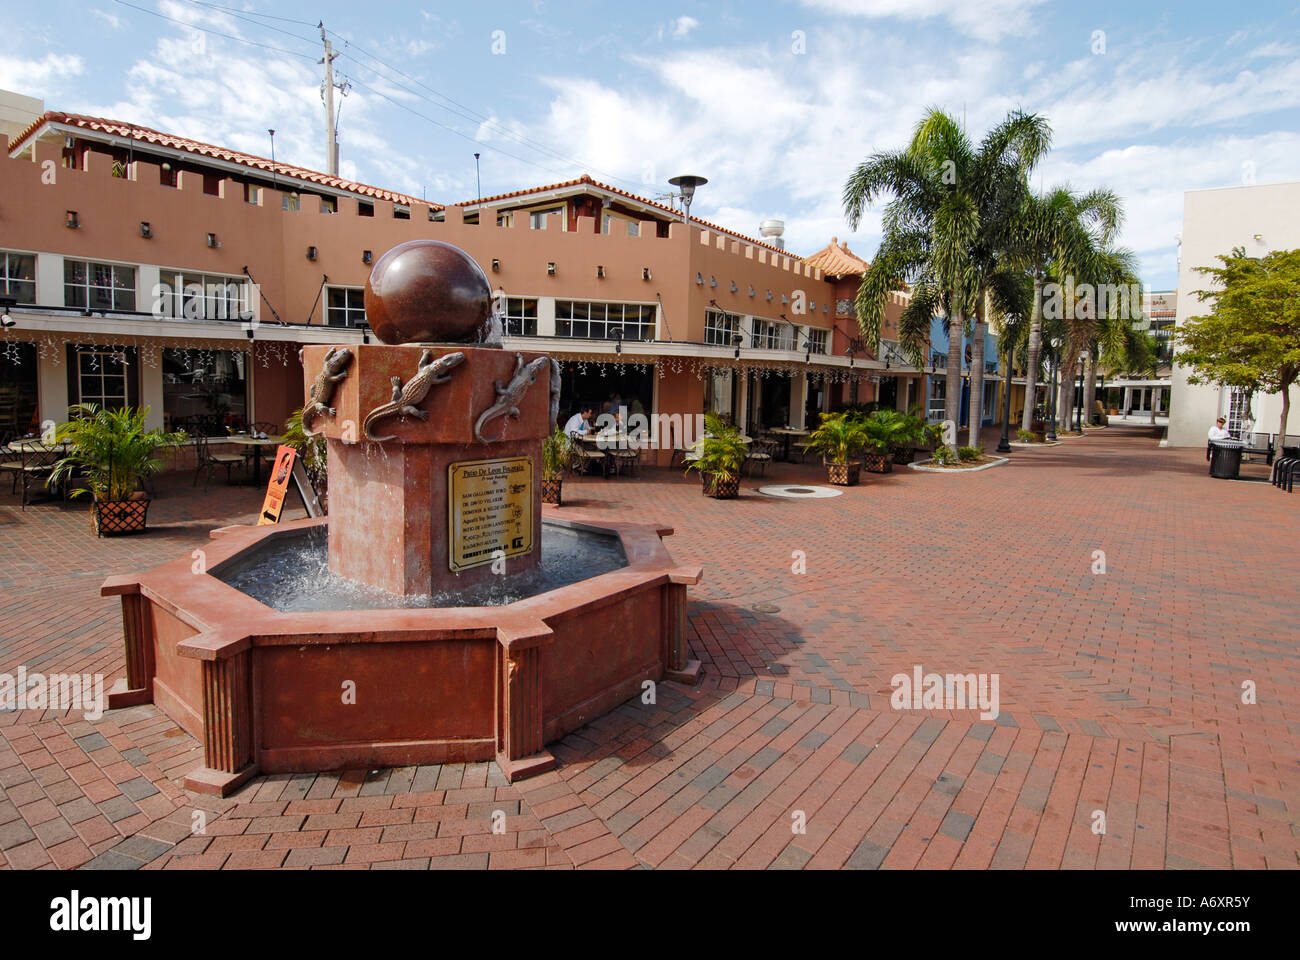 Patio de Leon in Historical downtown Ft Fort Myers Florida Fl Stock Photo